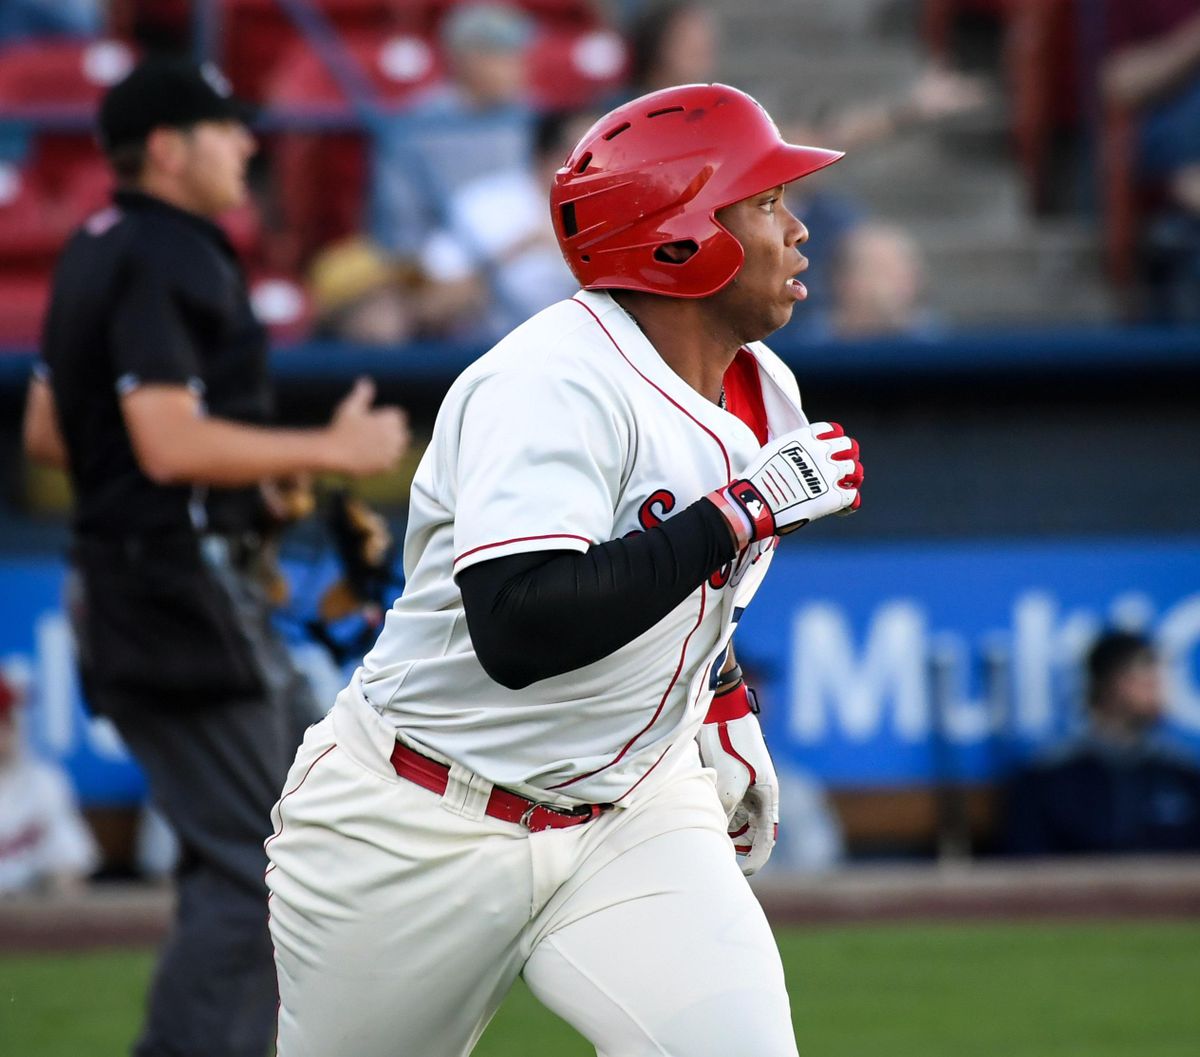 Slugger Curtis Terry has exceled for two seasons in Spokane. (Dan Pelle / The Spokesman-Review)